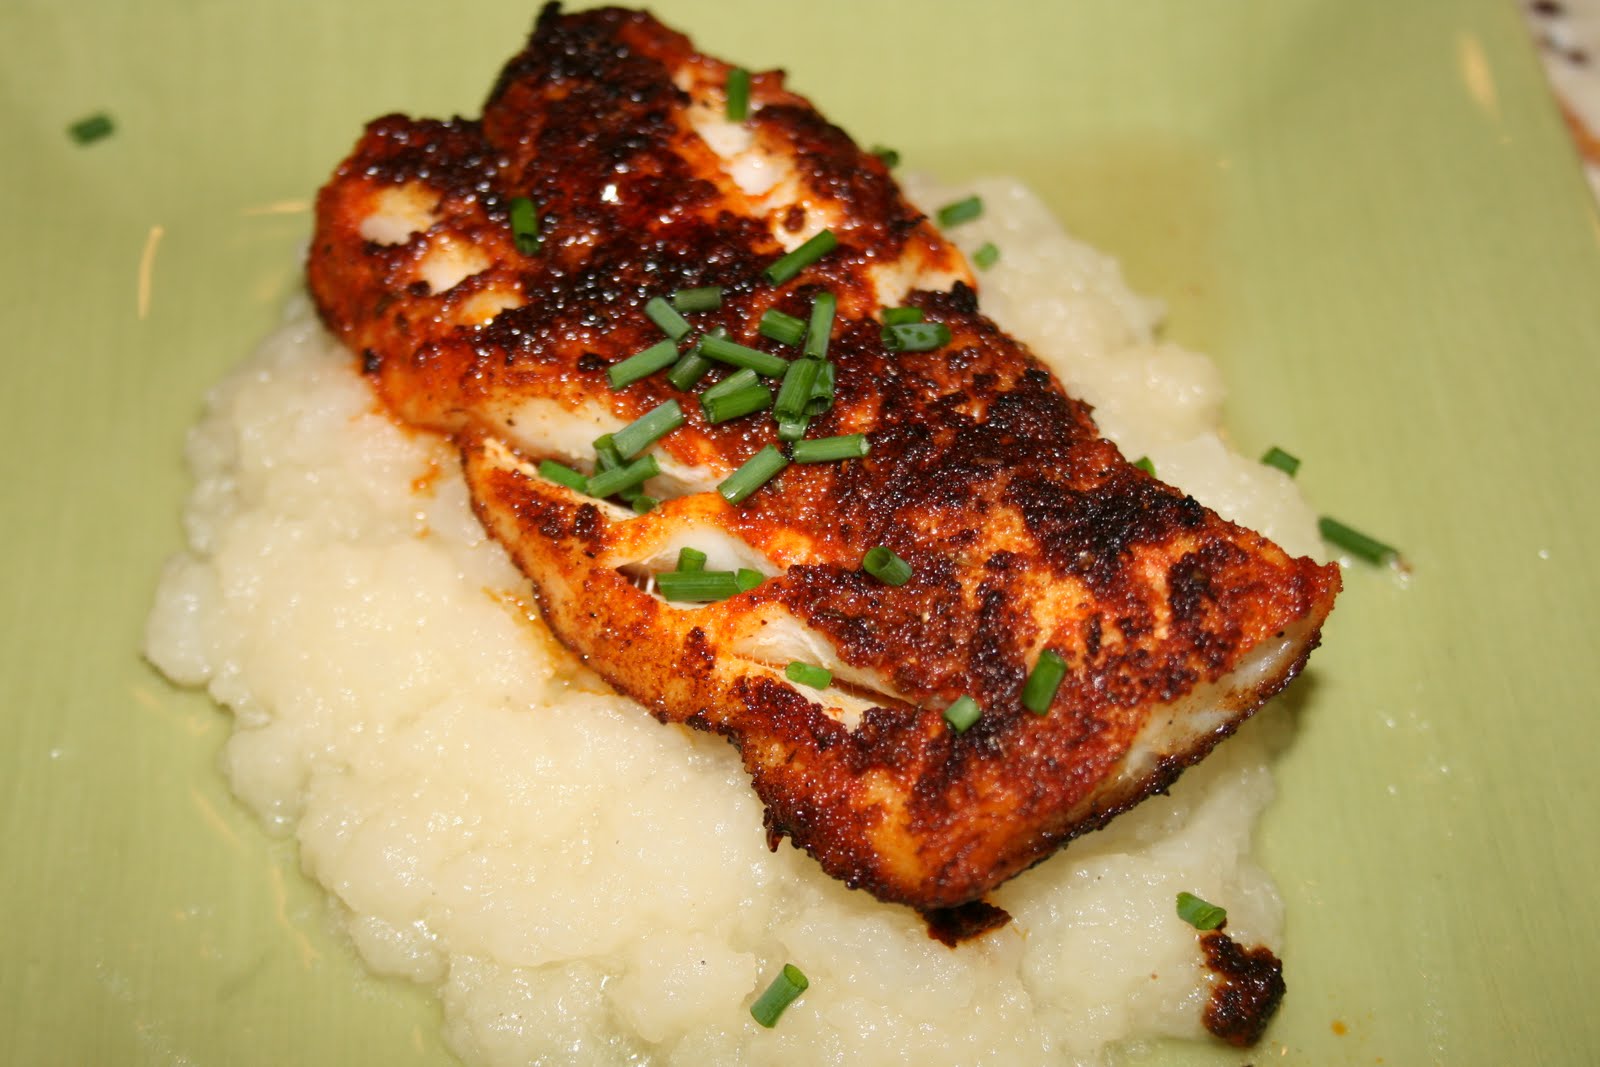 ... Table | Paleo Recipes, meal plans, and shopping lists: Blackened Cod